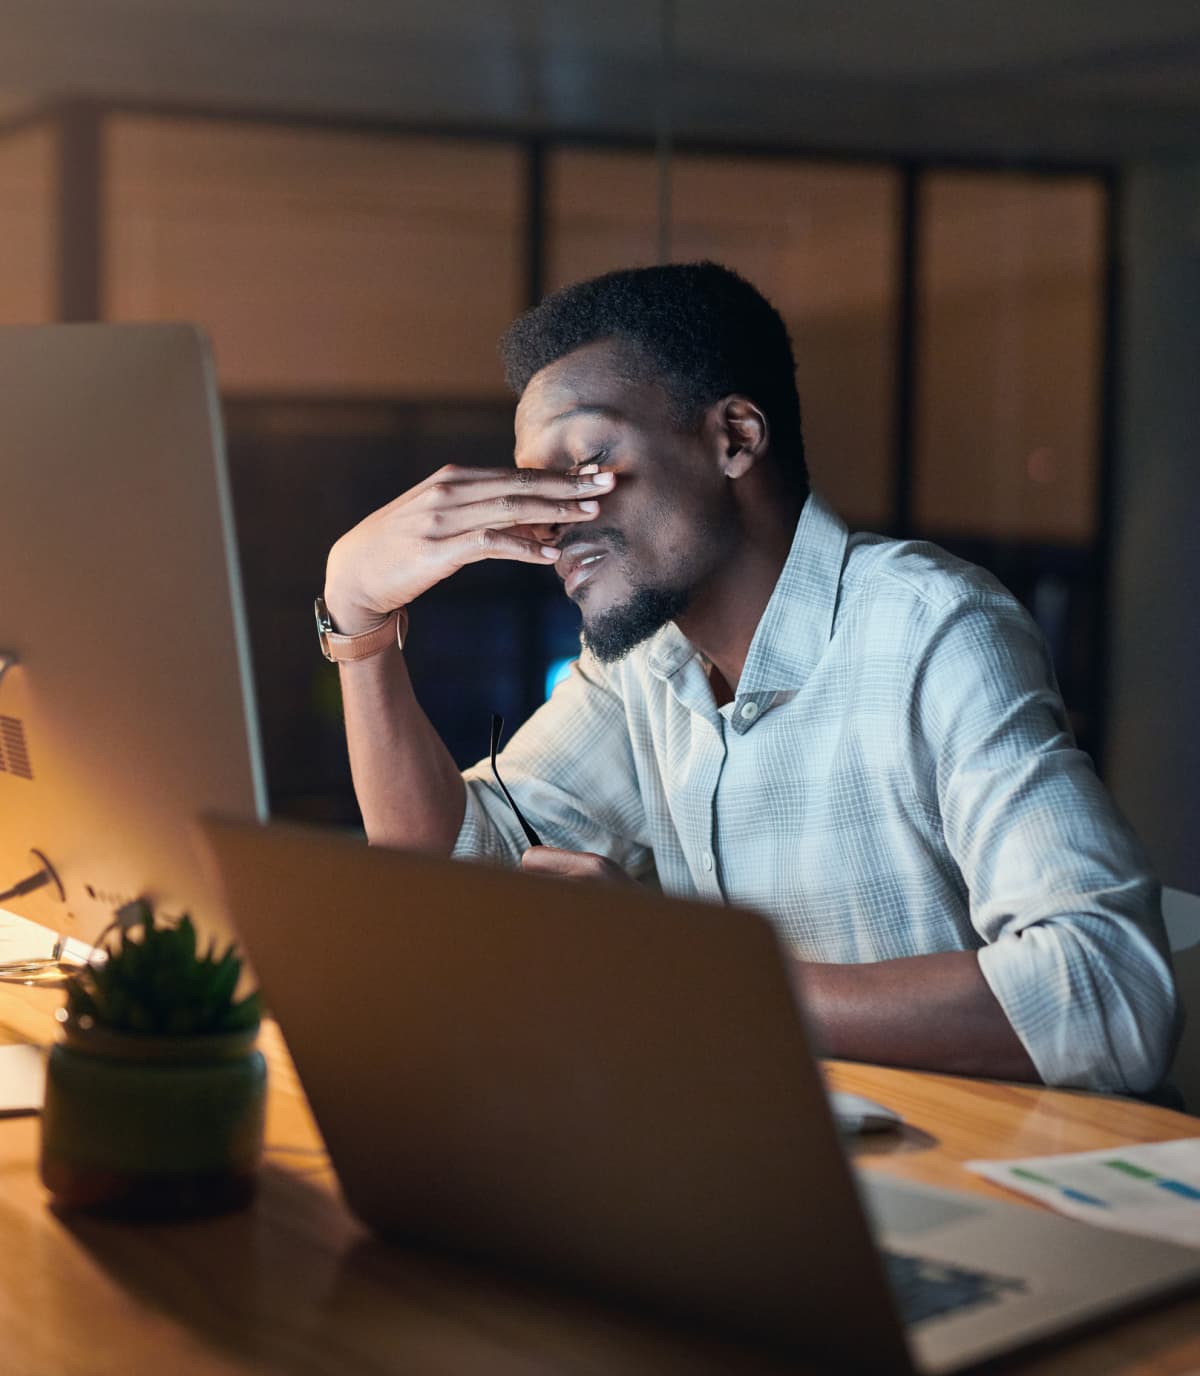 man working late at night on a laptop rubbing his eyes in frustration